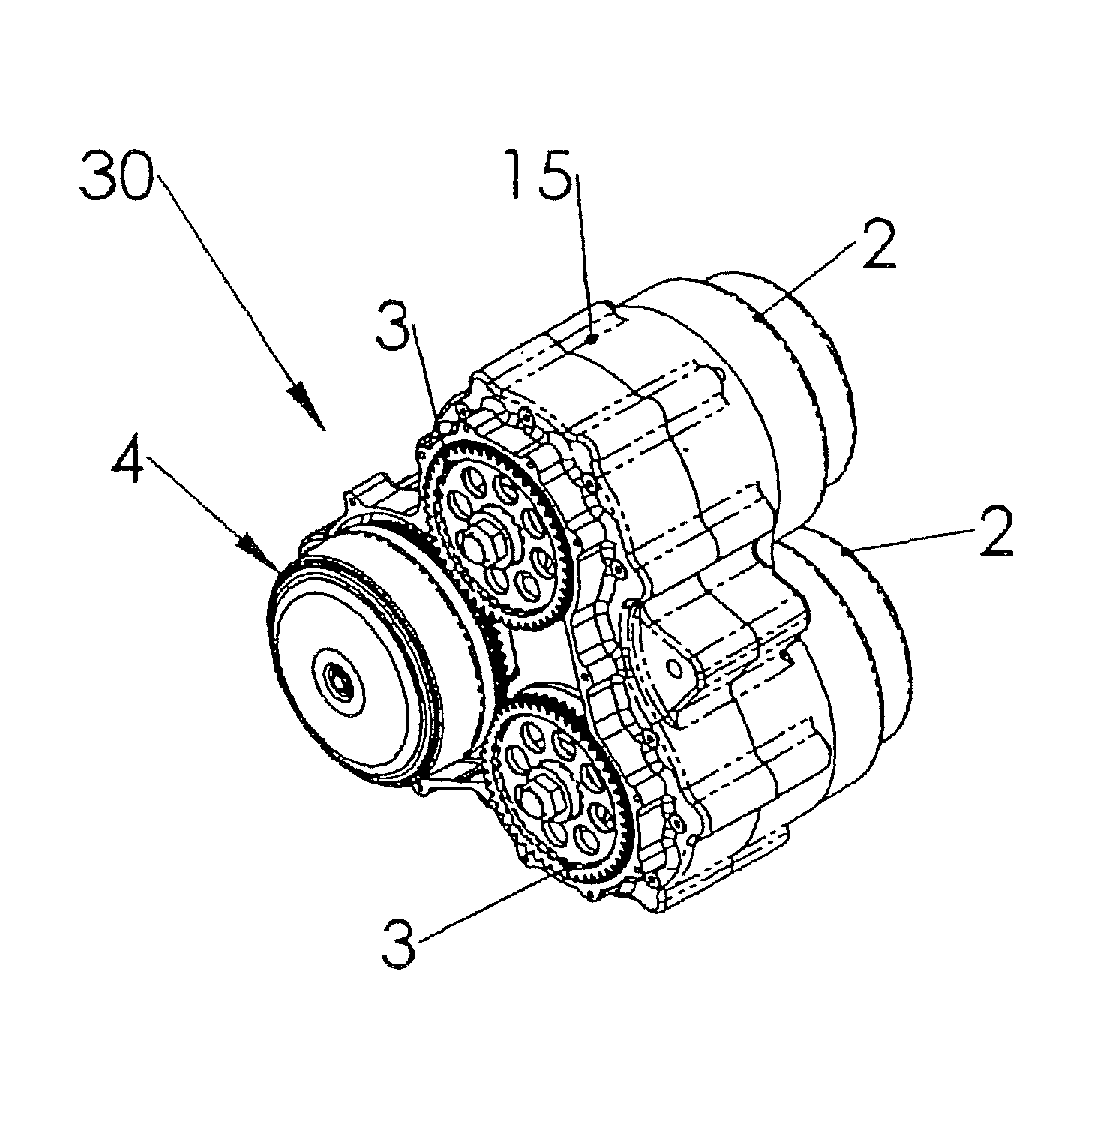 Propulsion system for a self-propelled vehicle with multiple electric drive units